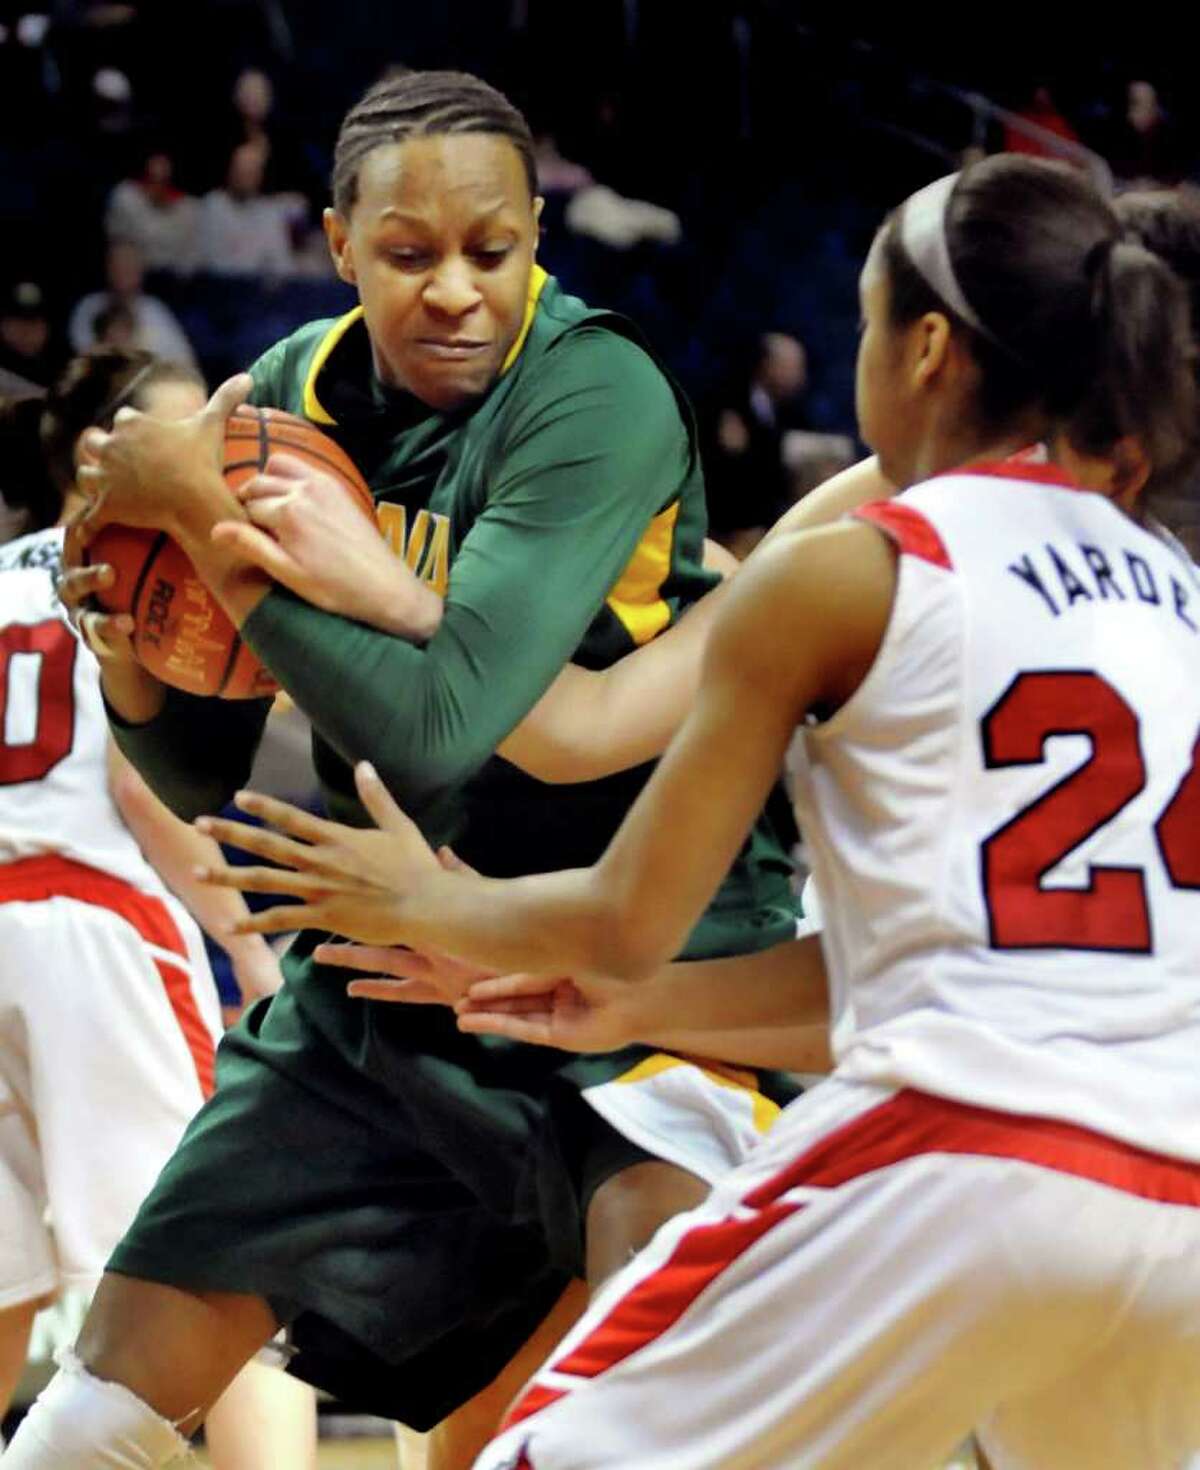 Siena's Serena Moore (32), left, secures the rebound during their basketball game against Marist at the MAAC Championships on Saturday, March 5, 2011, at Webster Band Arena at Harbor Yard in Bridgeport, Conn. (Cindy Schultz / Times Union)